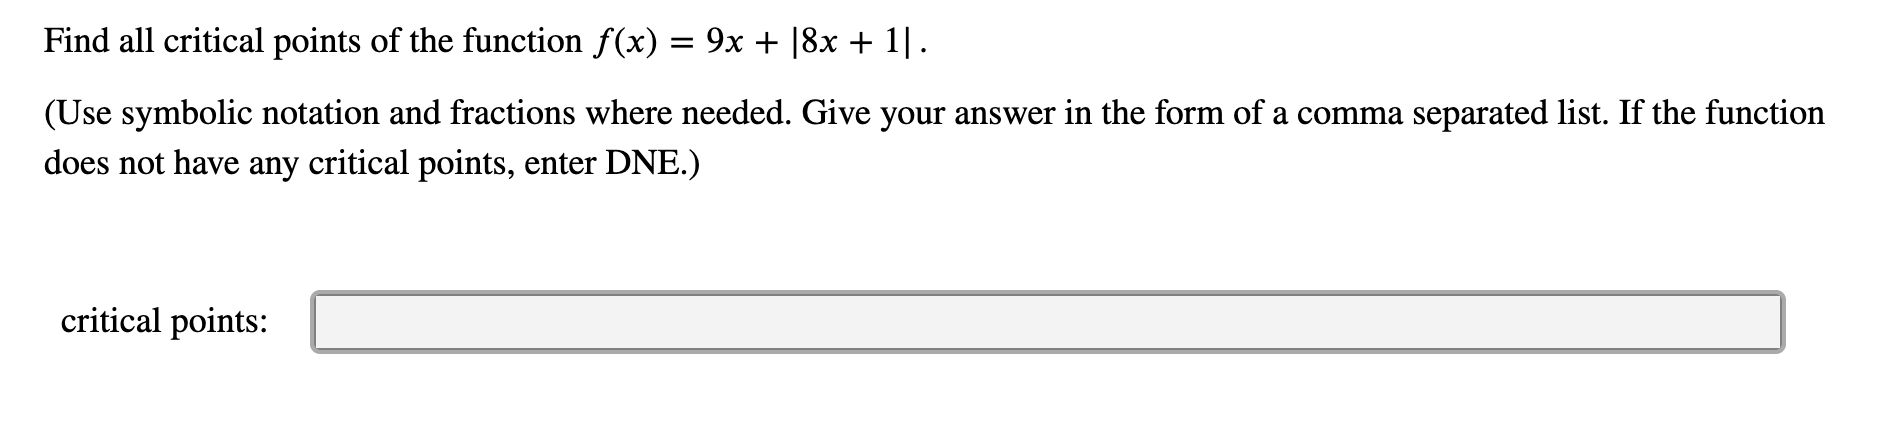 Find all critical points of the function f(x) 9x + 18x 1
(Use symbolic notation and fractions where needed. Give your answer in the form of a comma separated list. If the function
does not have any critical points, enter DNE.)
critical points
